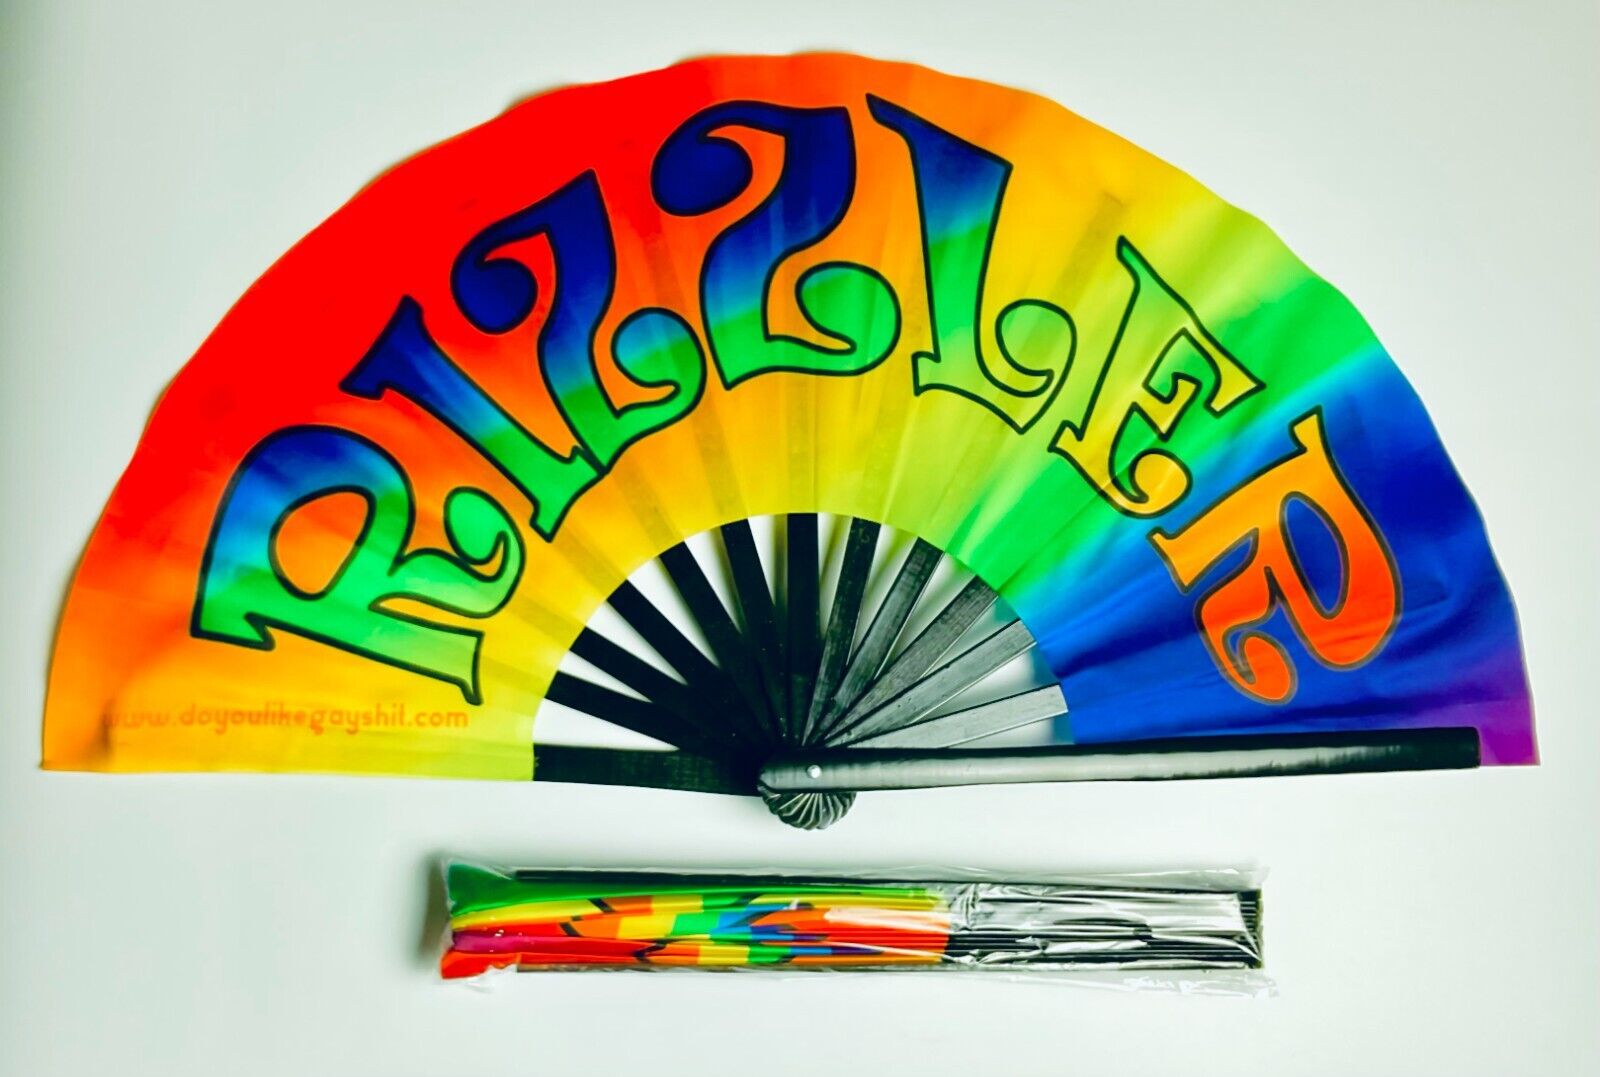 Rizzler 26"  Extra Large Folding Clack Gay Pride Fan Rave Current Popular Cool Do You Like Gay Shit?